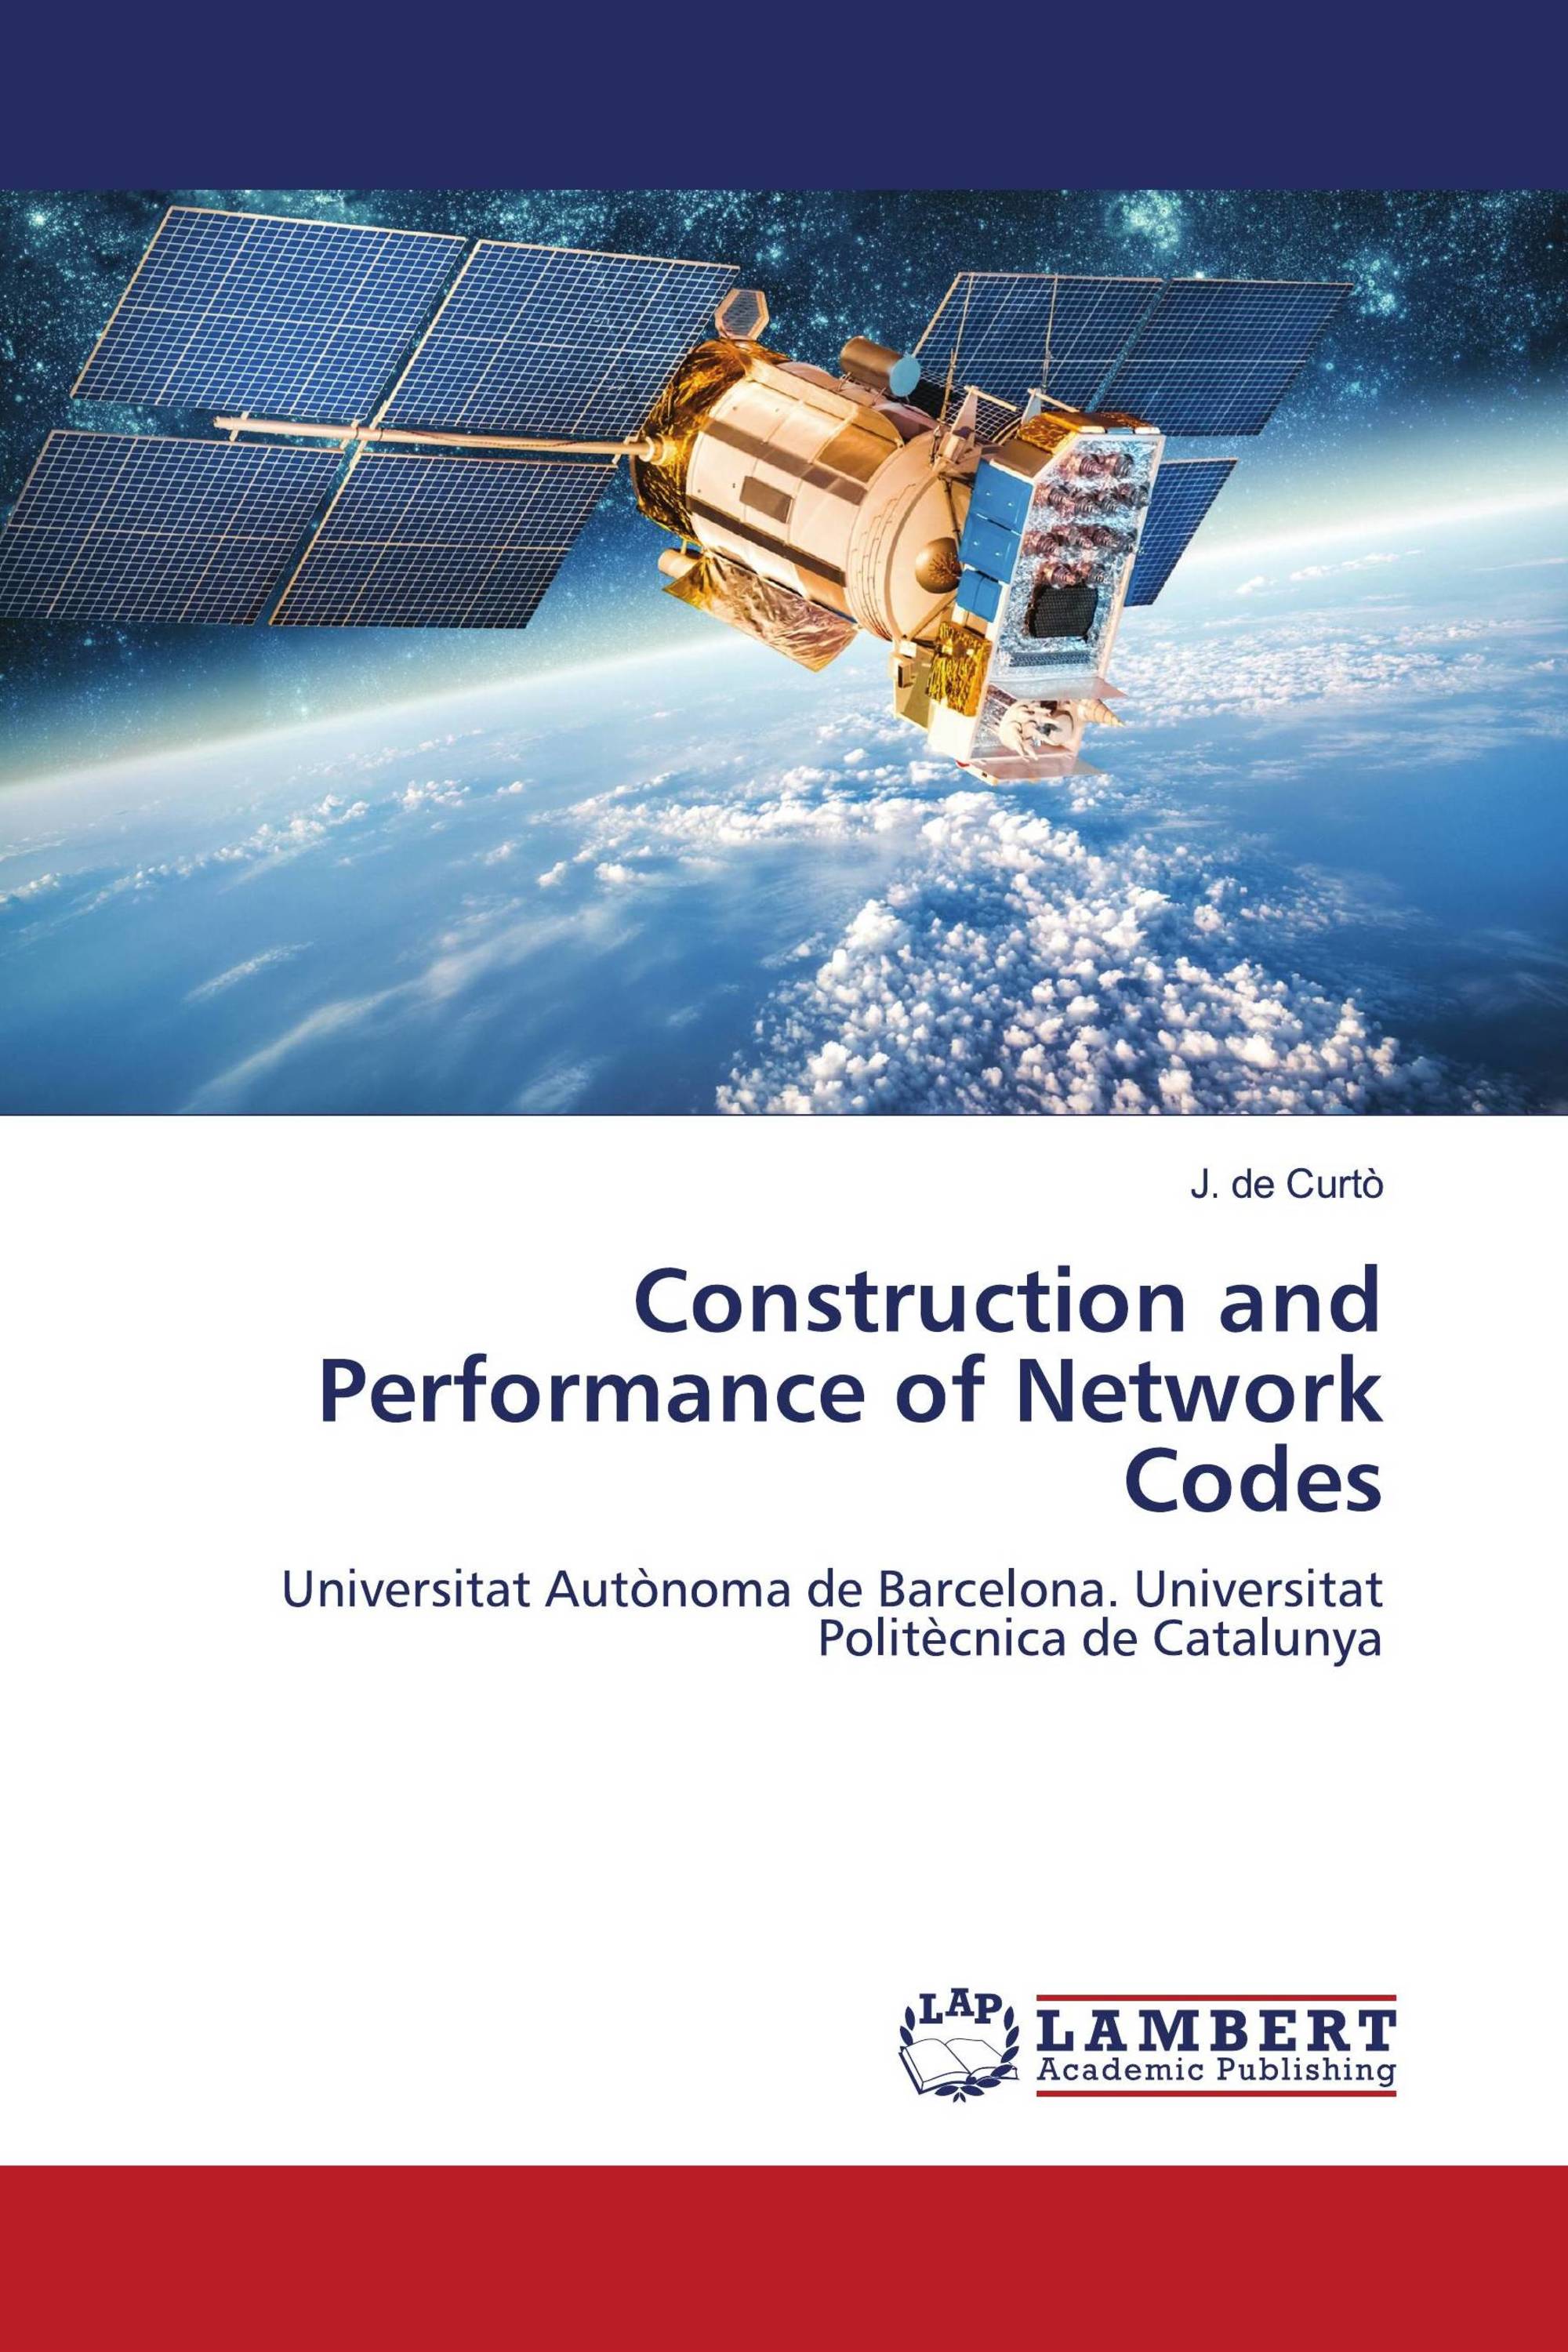 Construction and Performance of Network Codes